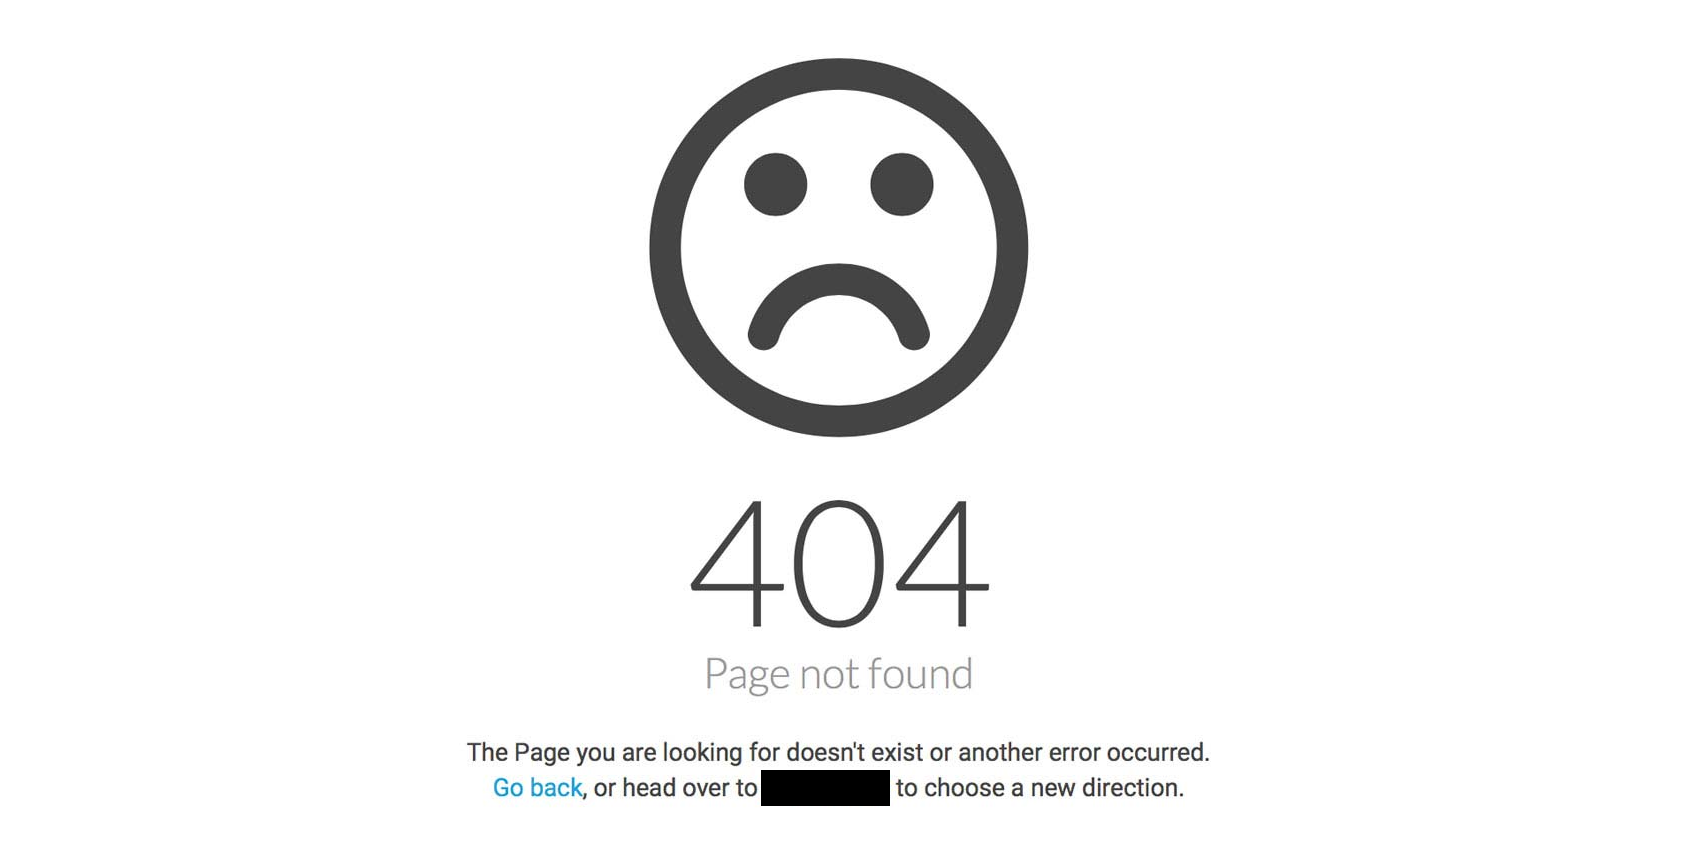 facebook-non-functional-landing-page-404-page-not-found